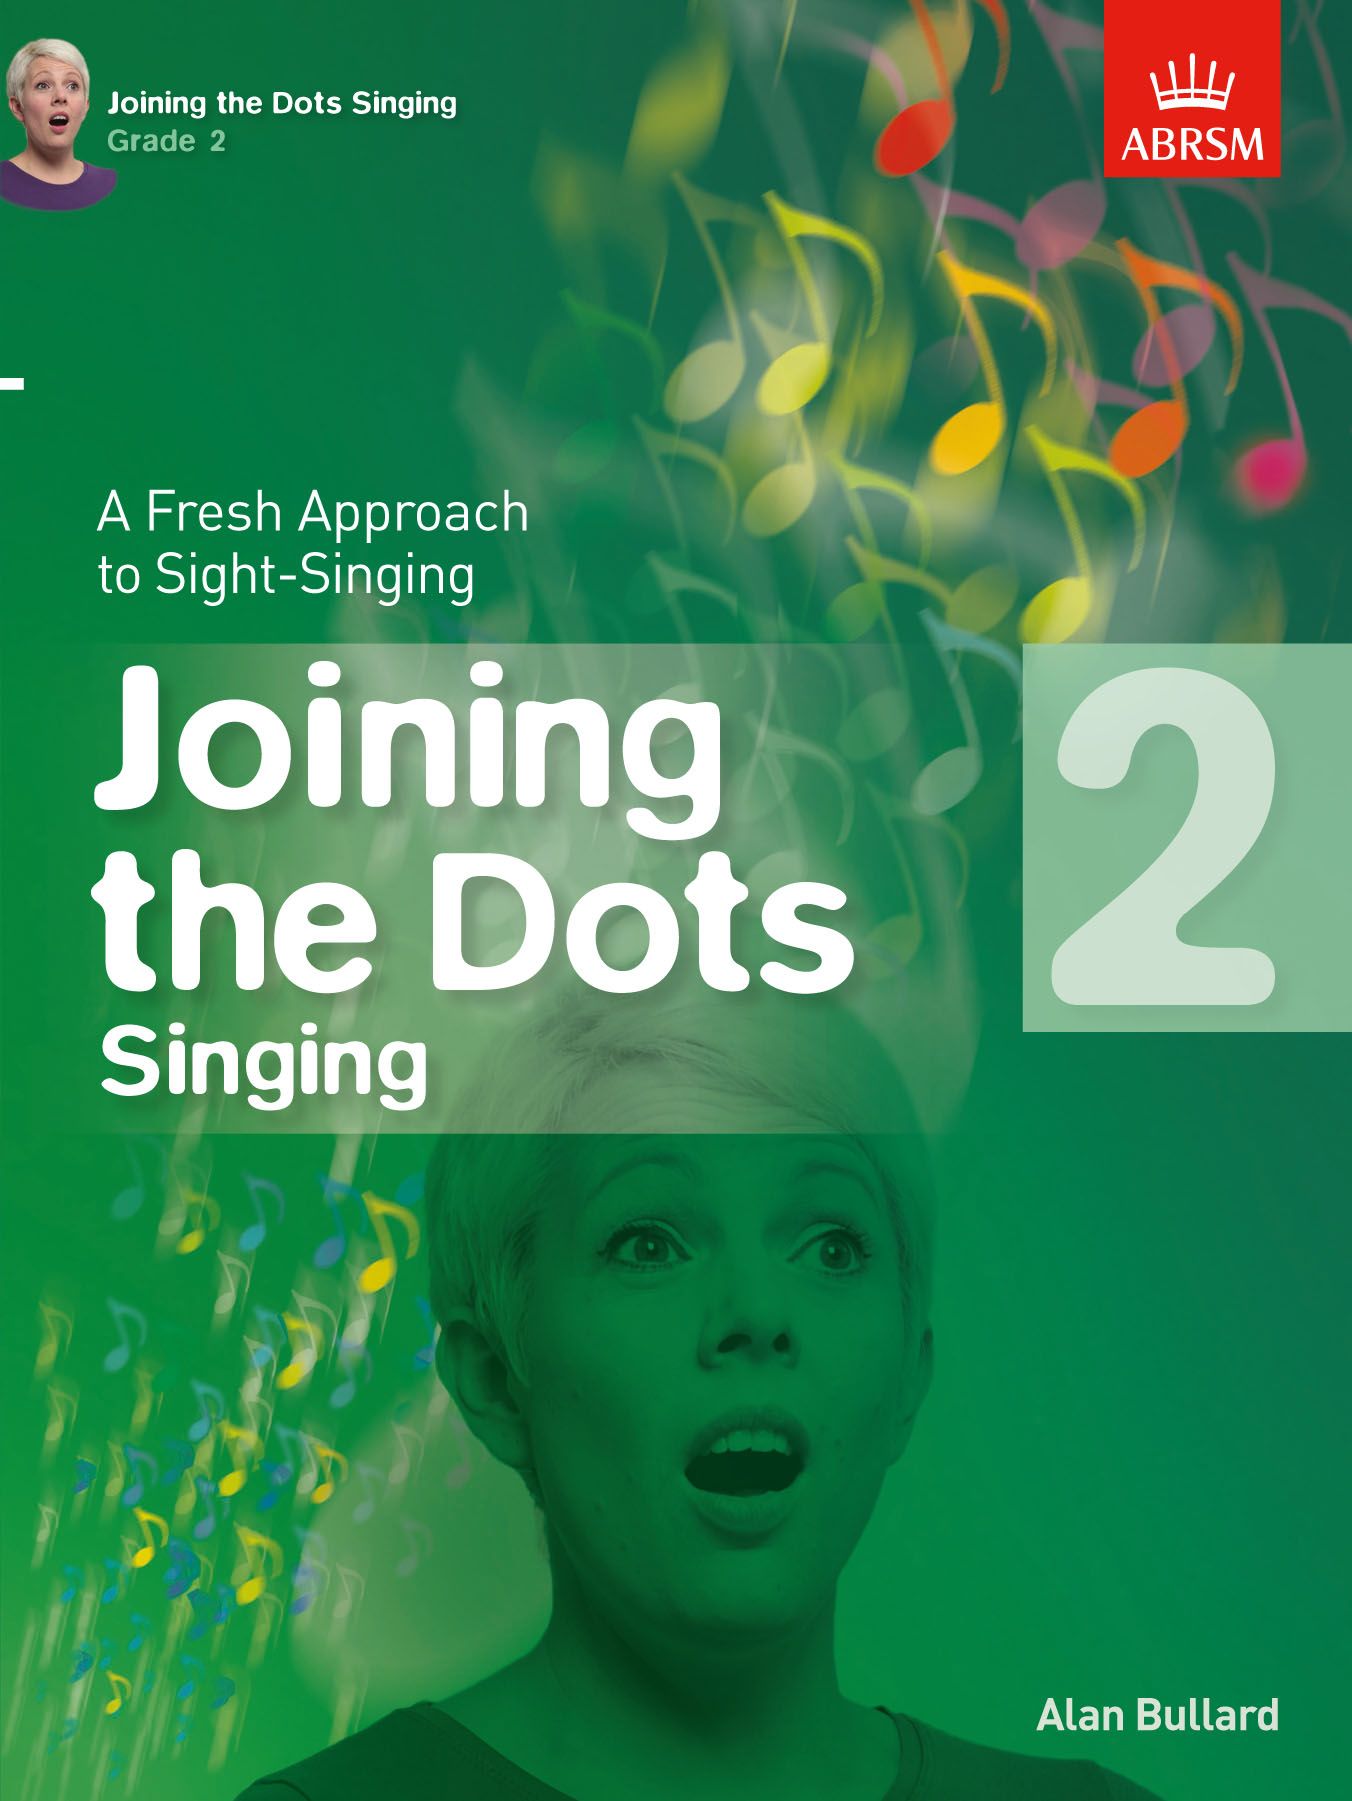 Joining the Dots for Singing G2